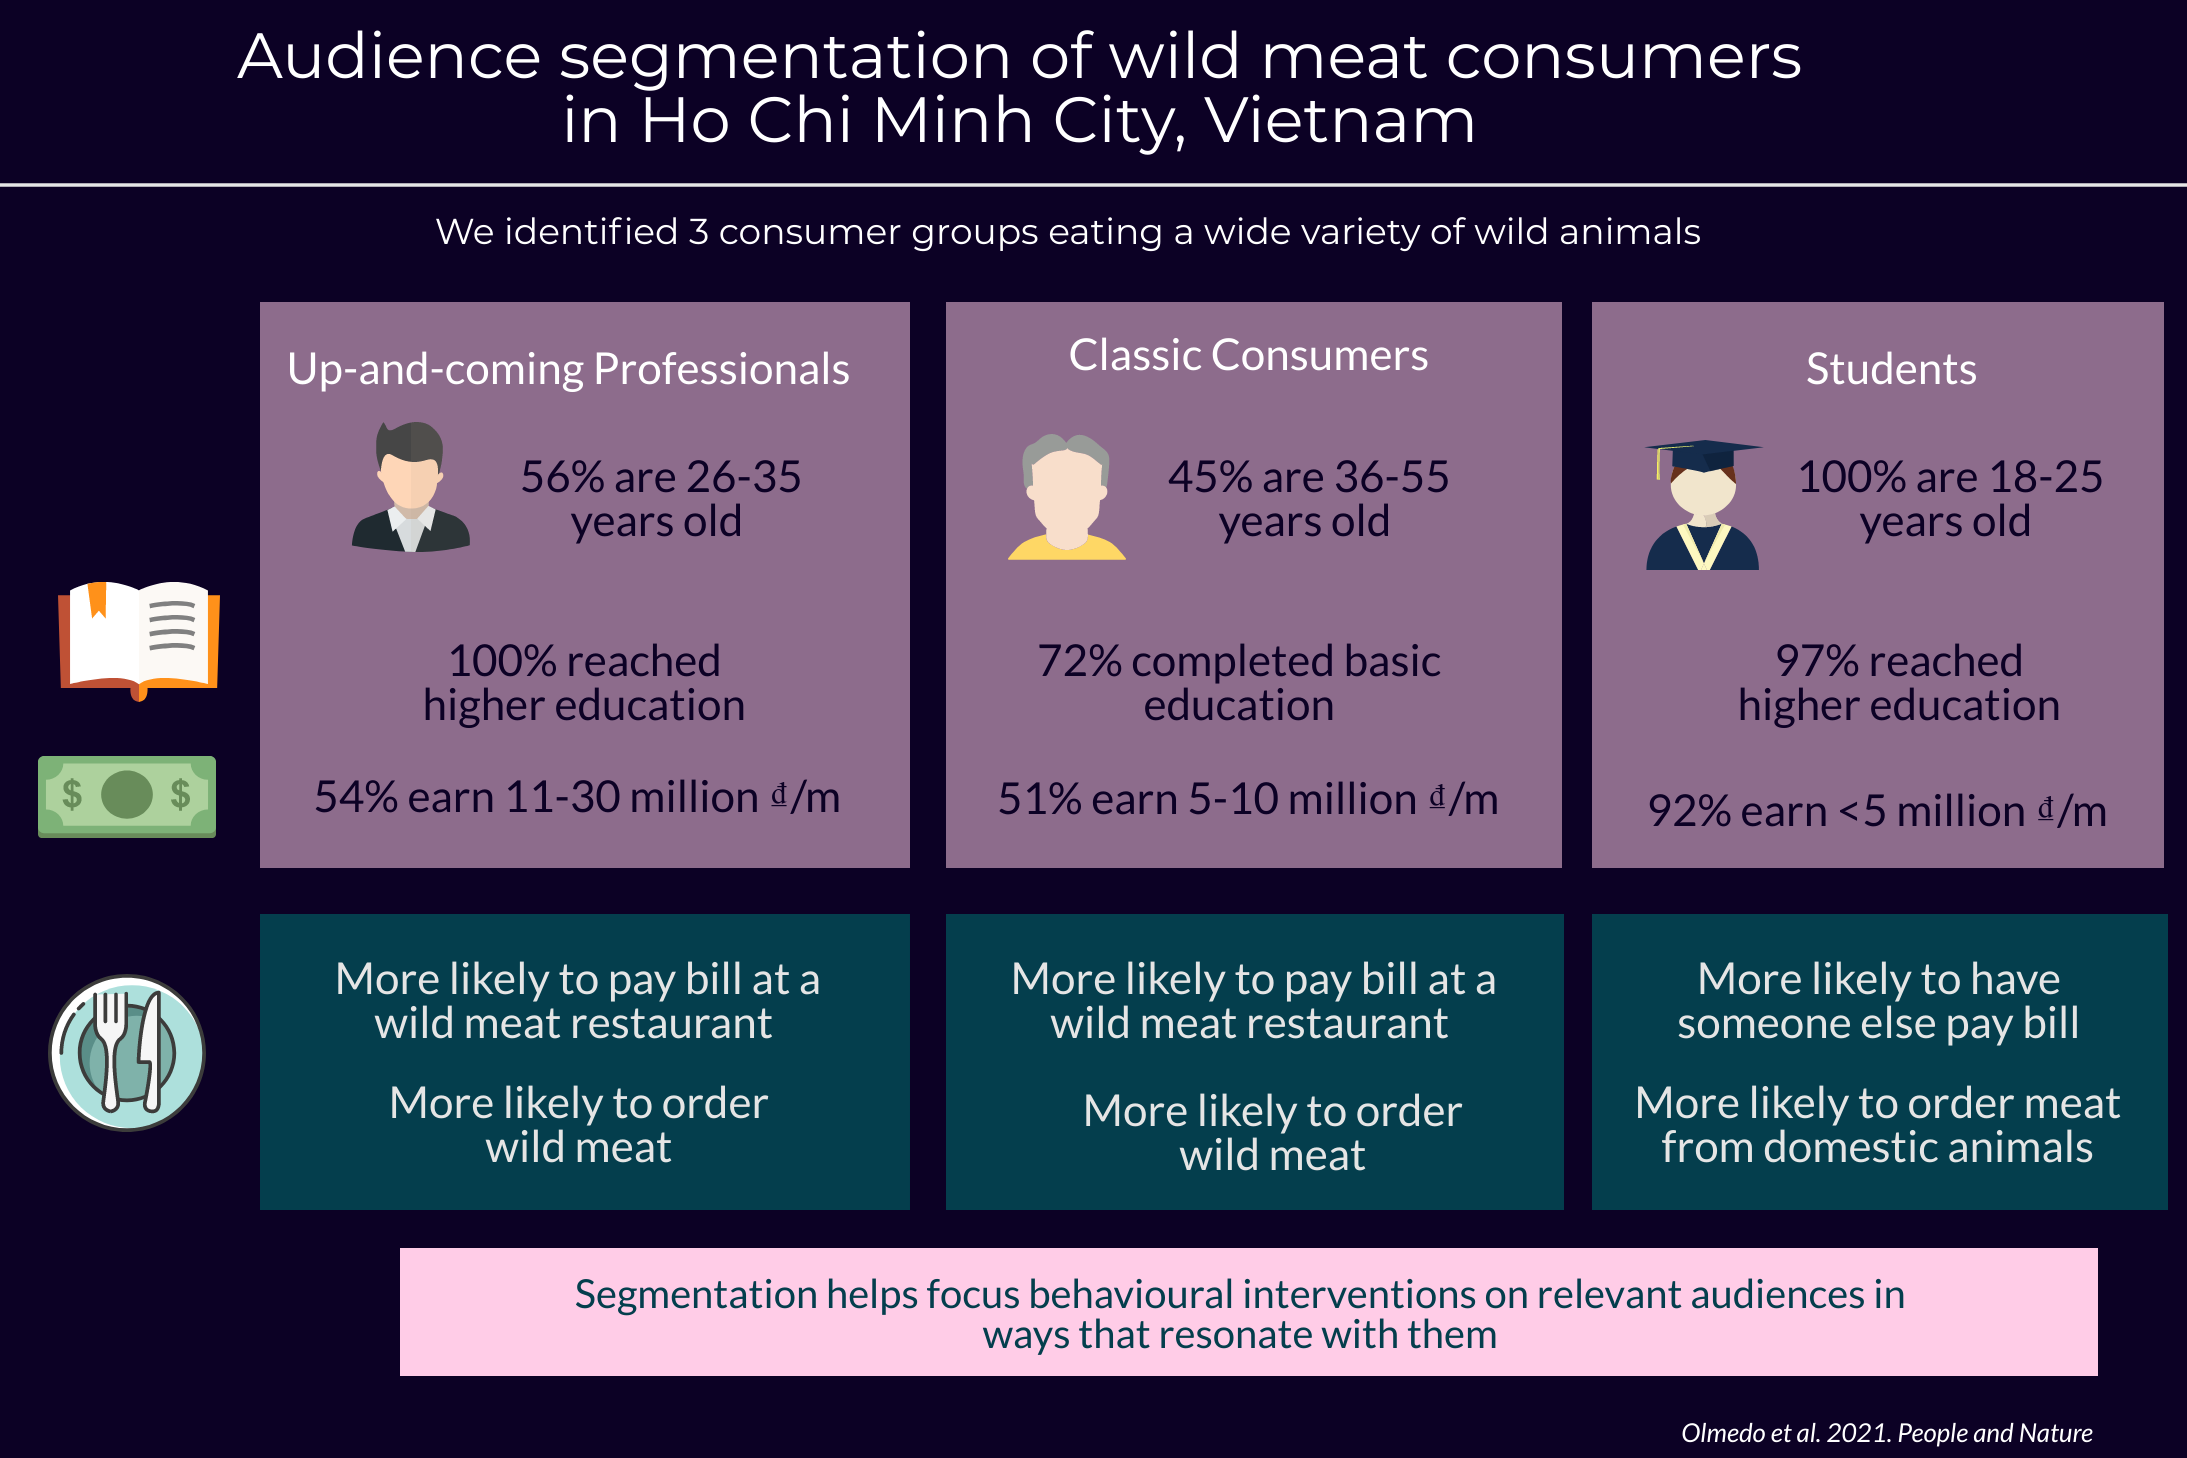 Characterising wild meat consumers in Vietnam visual abstract. Credit: Alegria Olmedo